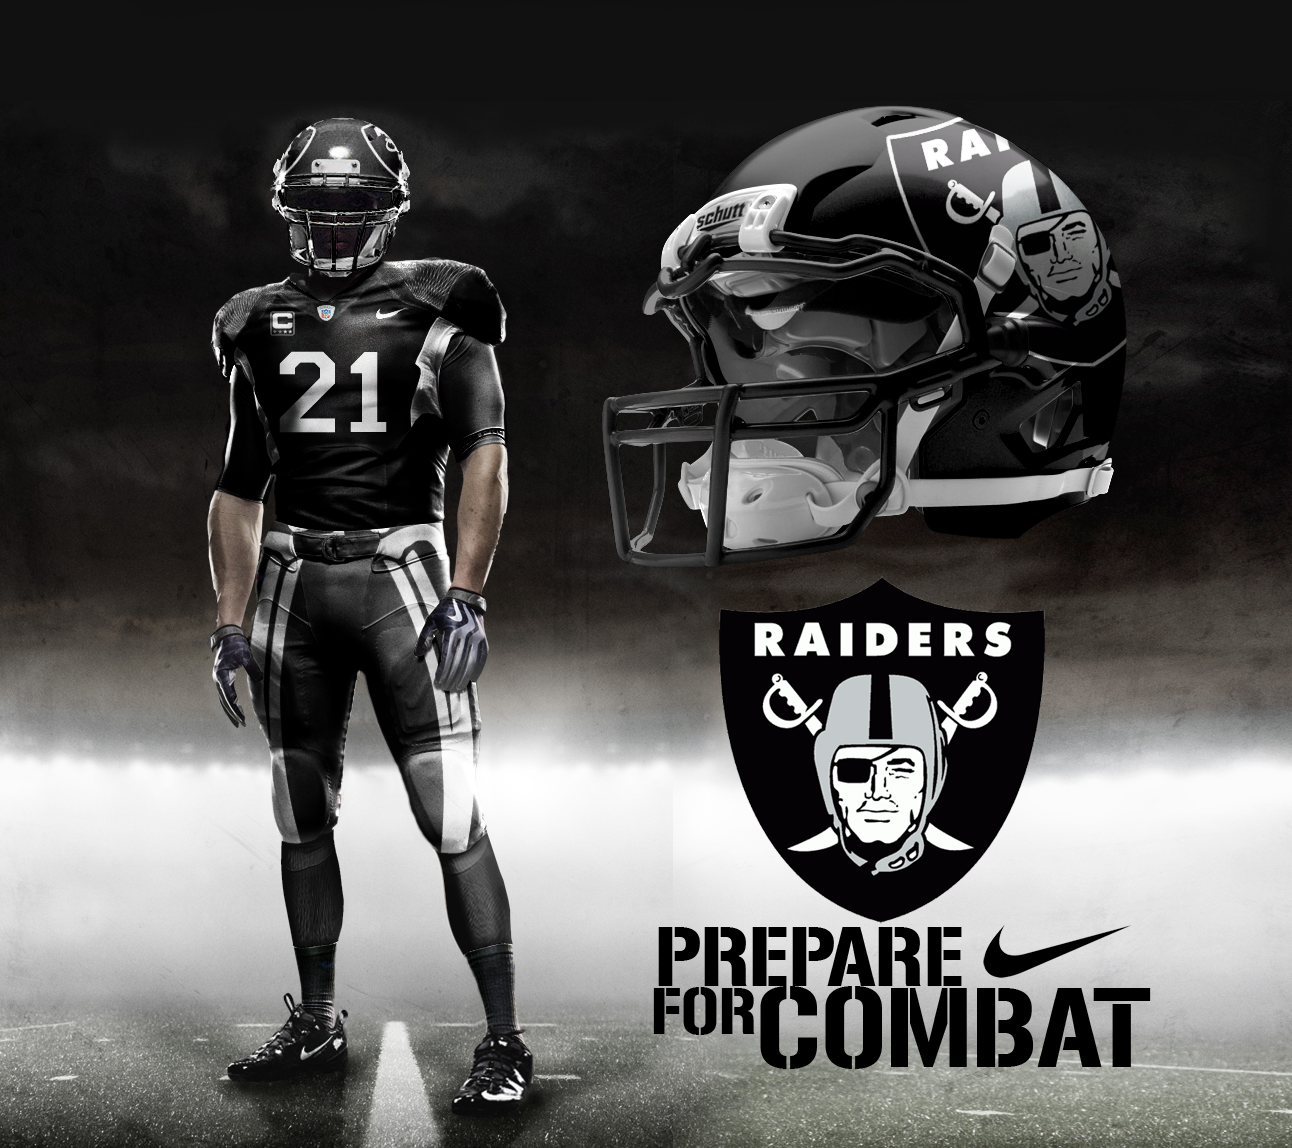 Raiders Logo High Definition Backgrounds 14101 - HD Wallpapers Site